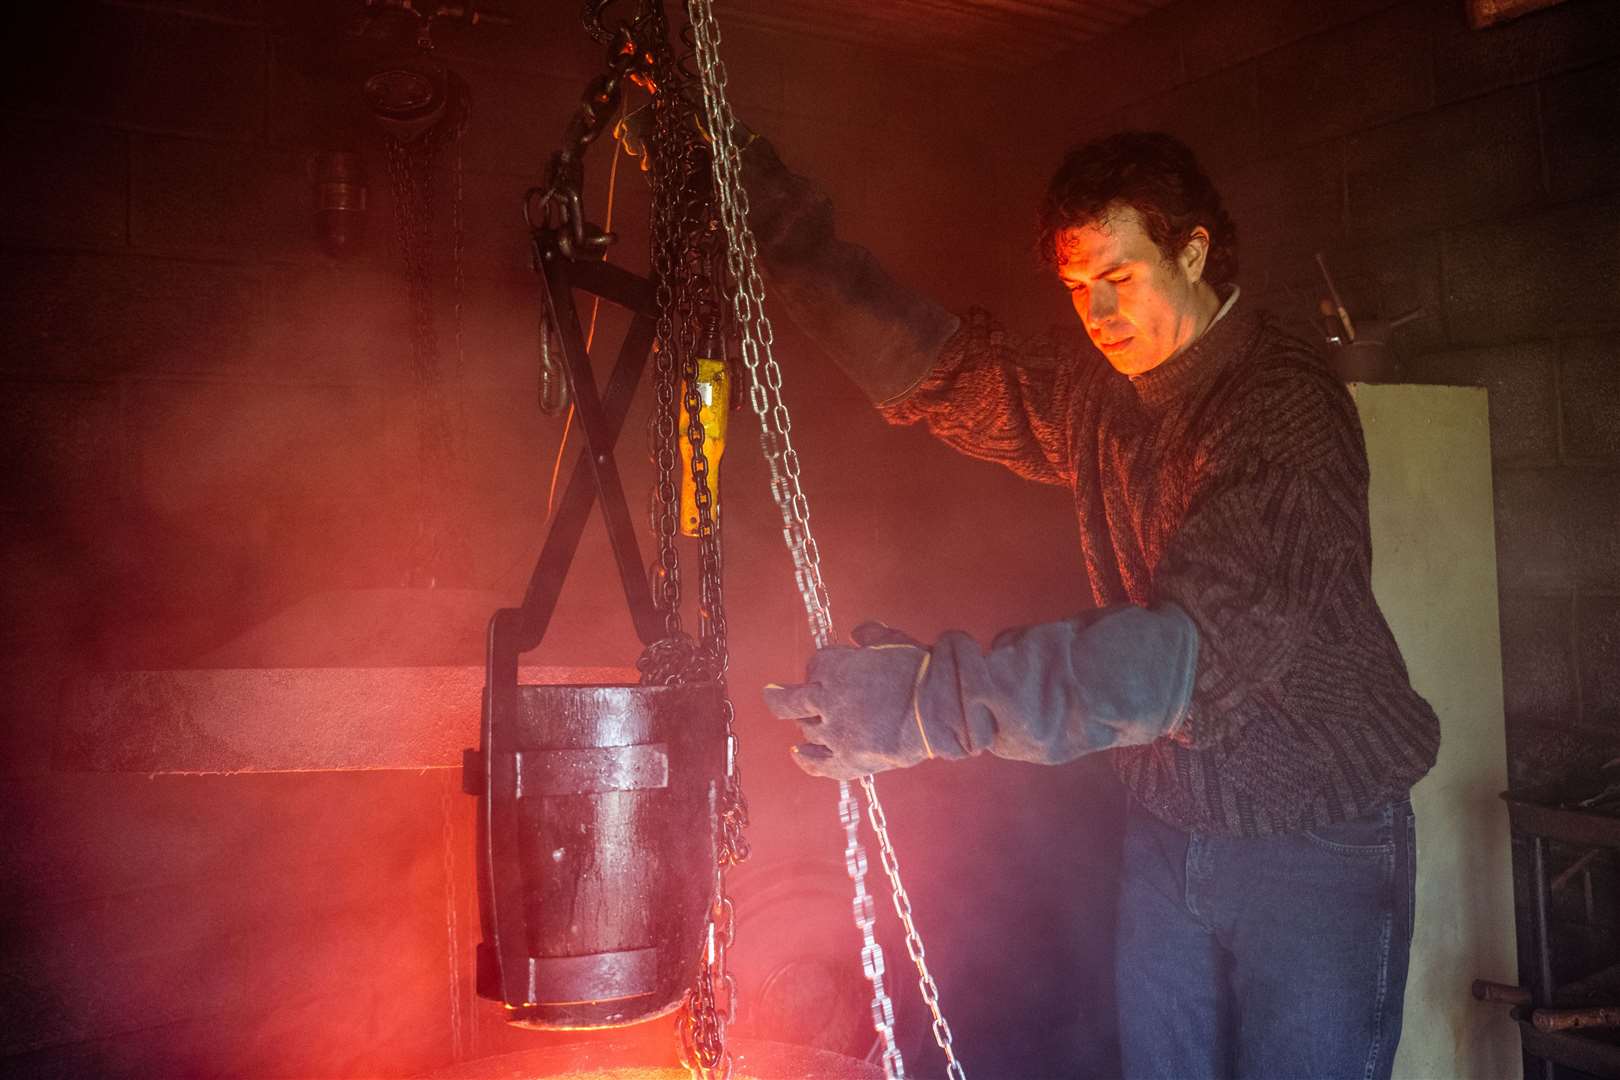 Scenes from BBC drama The Gold show Tom Cullen as John Palmer smelting the gold. Picture: Tannadice Pictures/Sally Mais